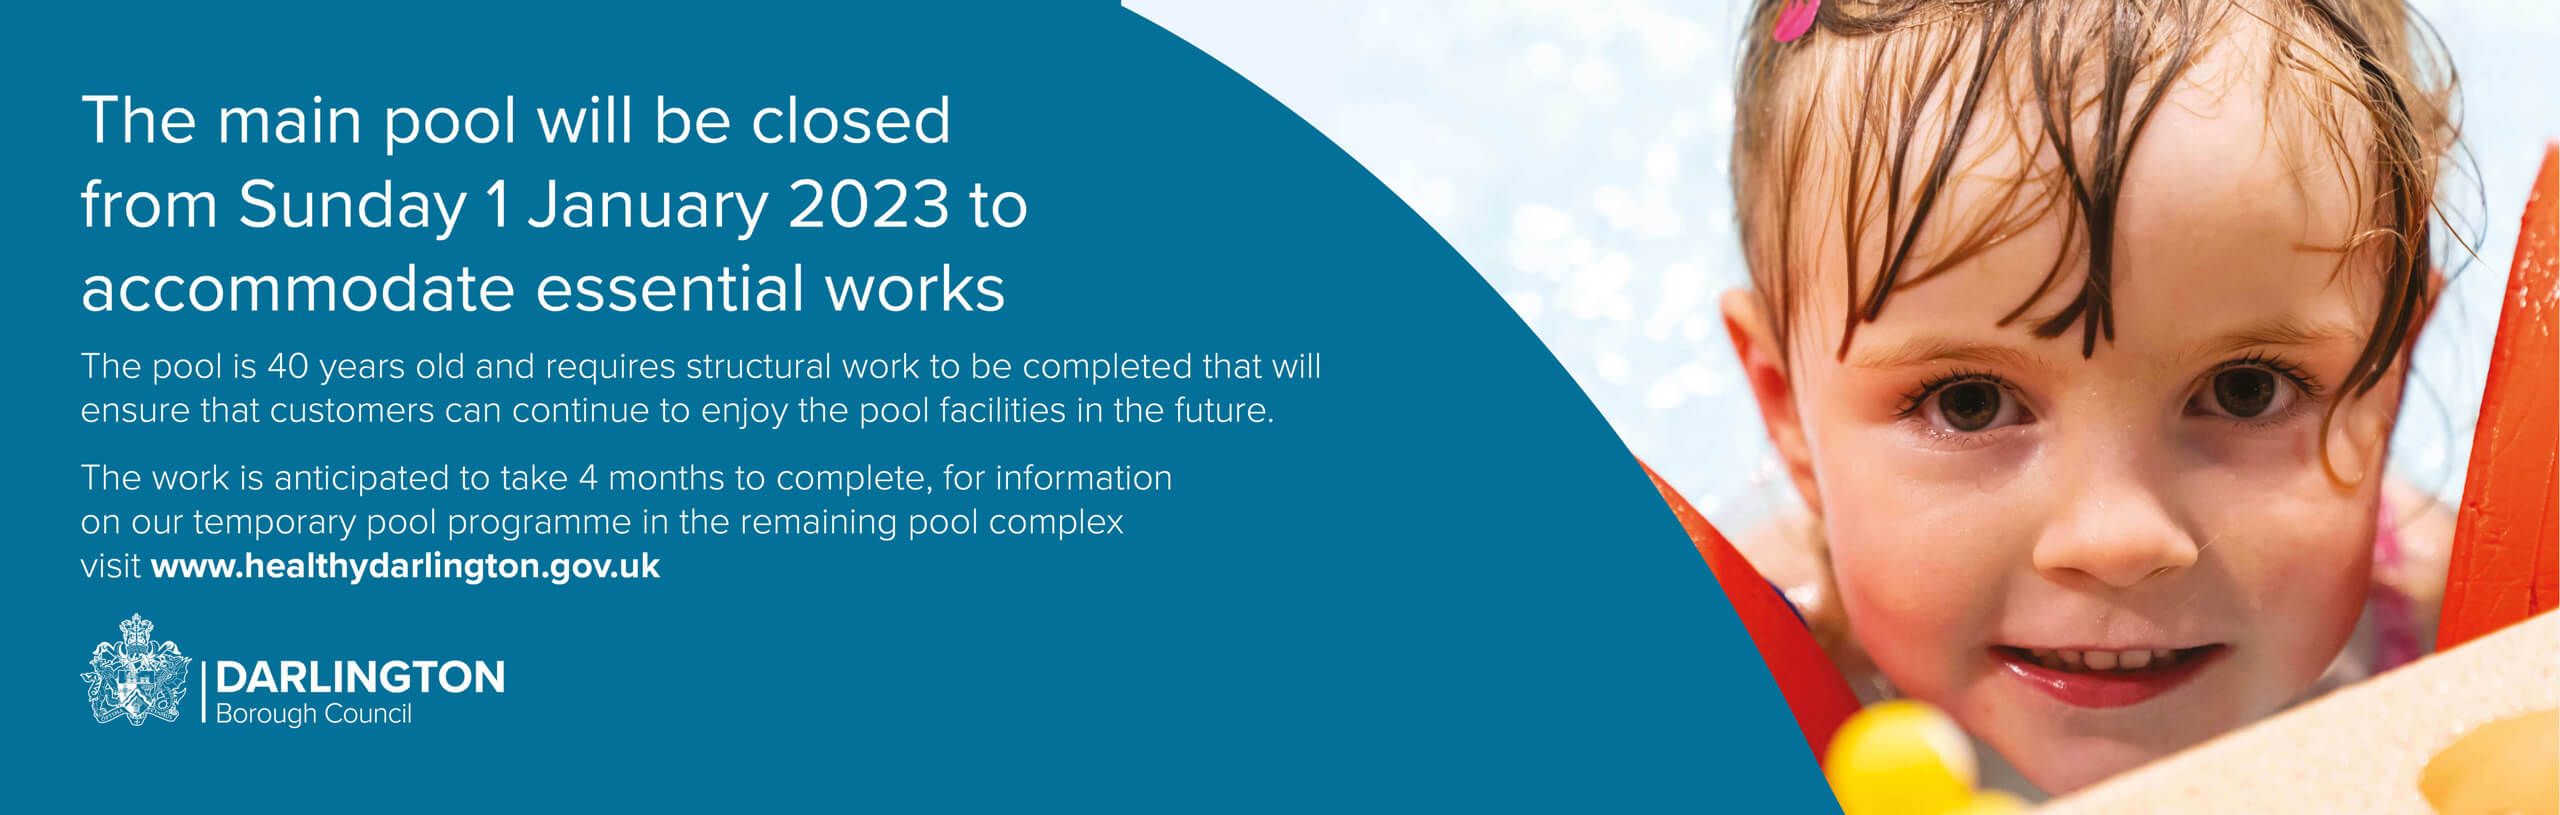 The main pool will be closed from Sunday 1 January 2023 for essential works